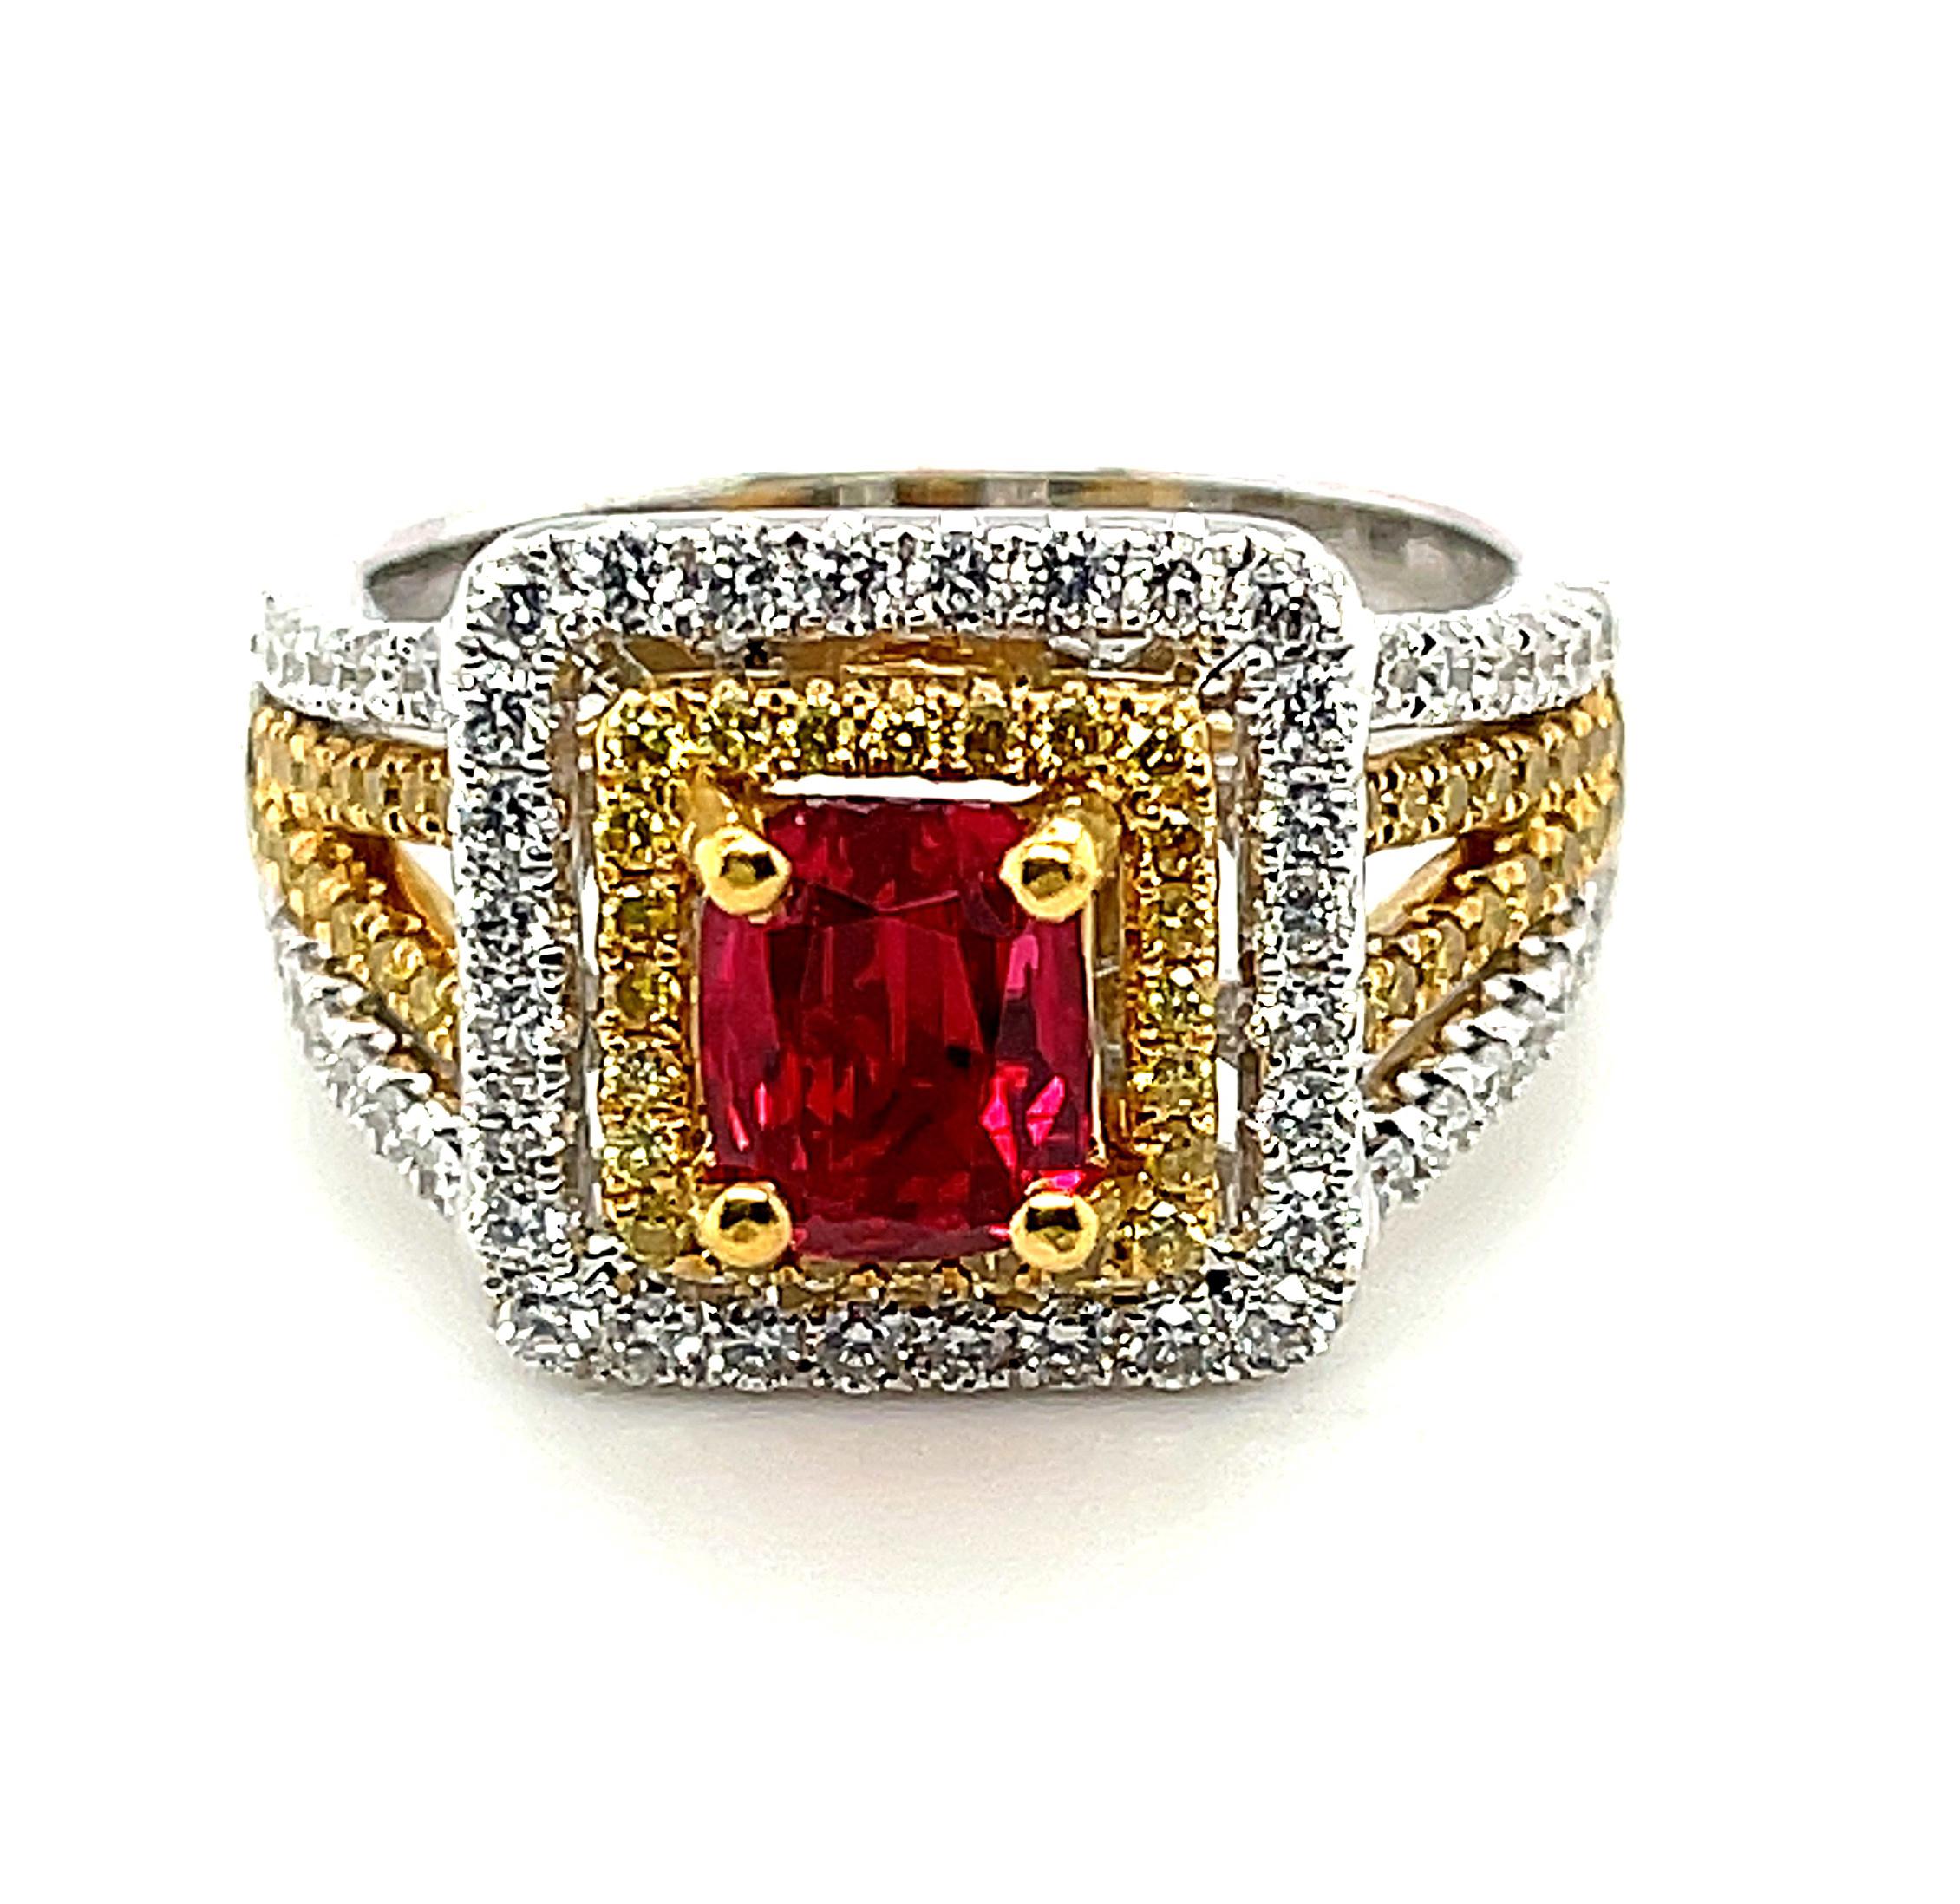 This stunning ring features a red-as-a-Burmese-ruby spinel set with canary yellow diamonds and sparkling white diamonds set in 18k white and yellow gold. The diamonds form a double 